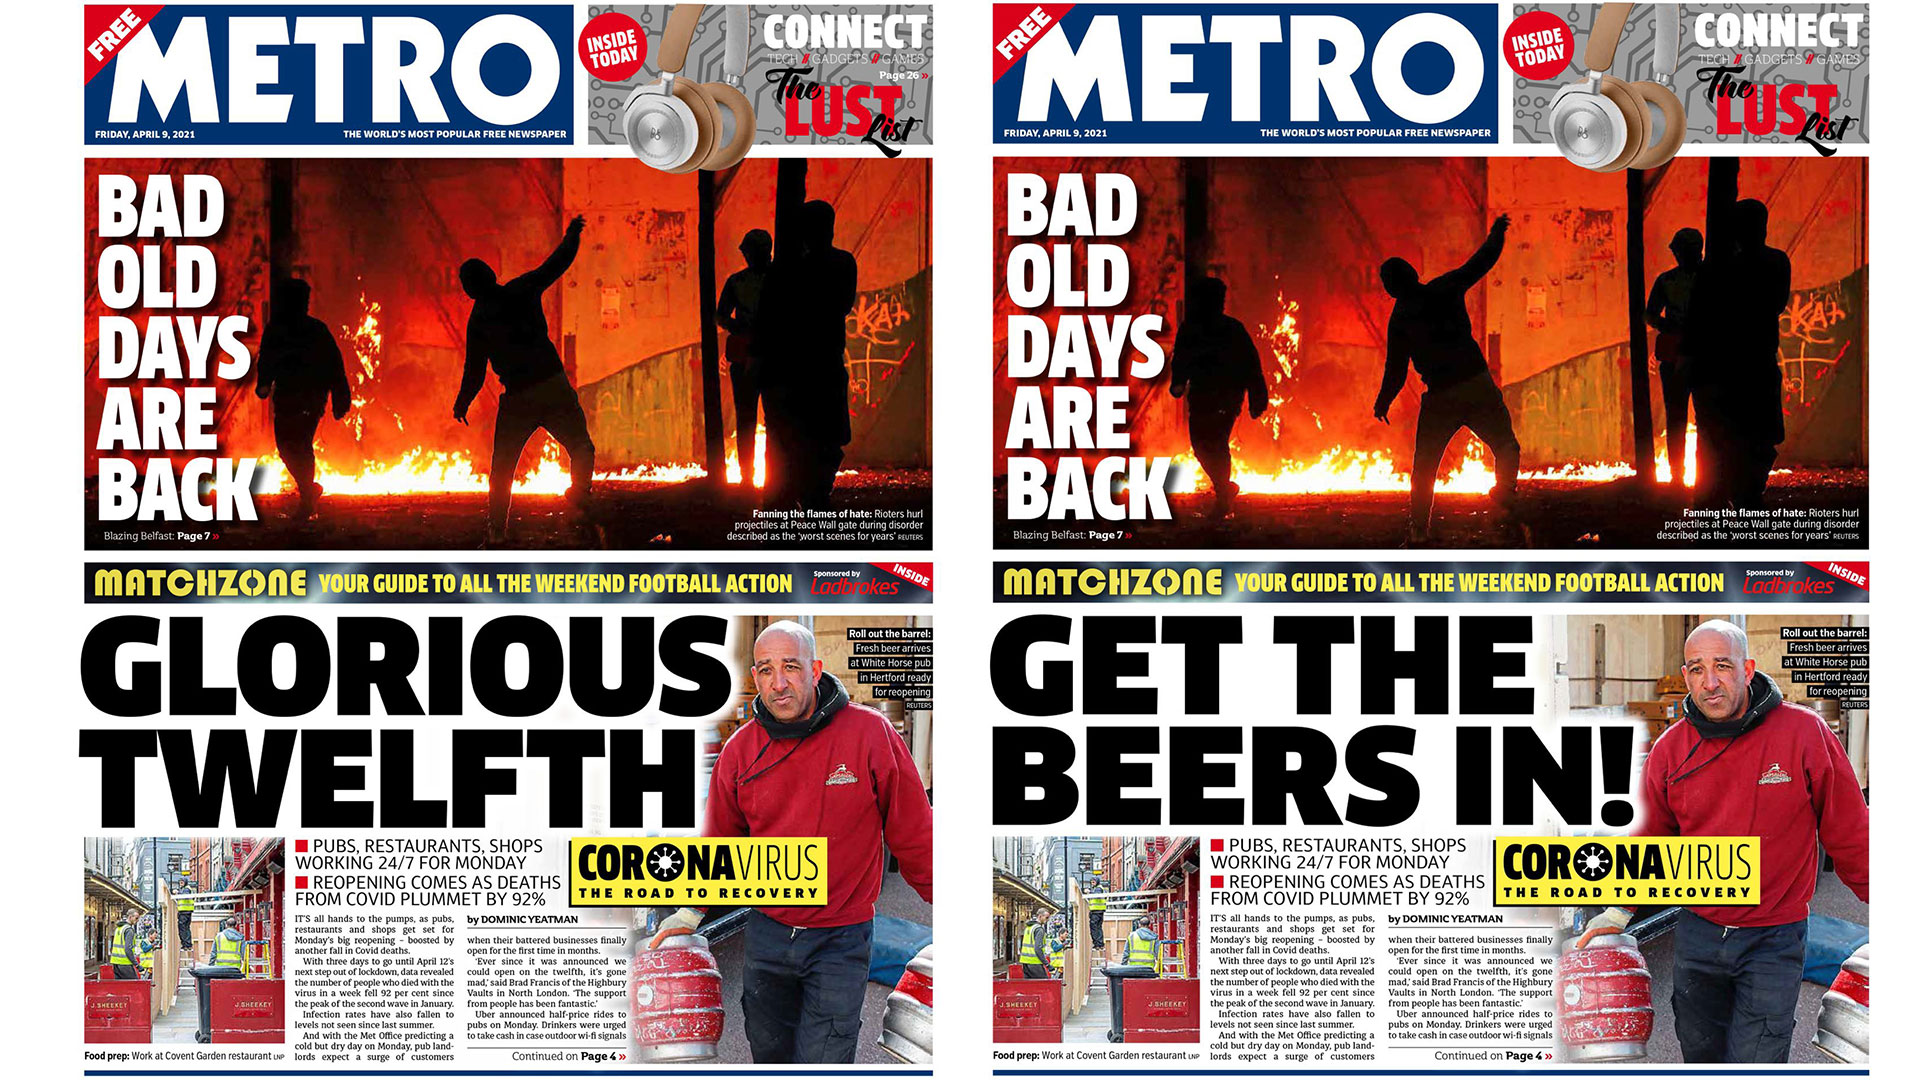 Metro newspaper covered after insensitive headline on Northern Ireland